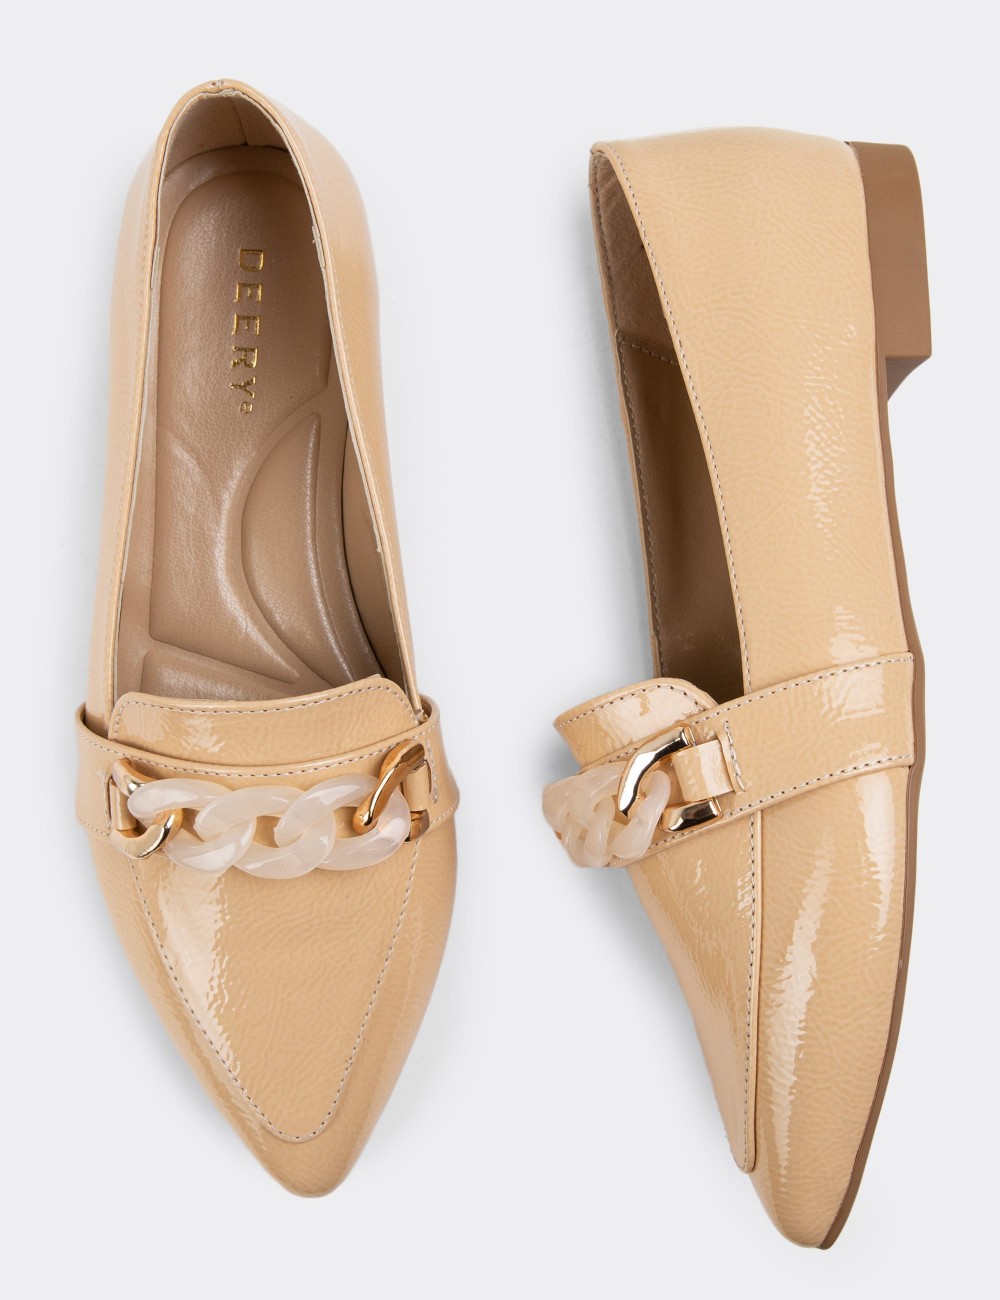 Camel Patent Loafers - 38606ZCMLC01